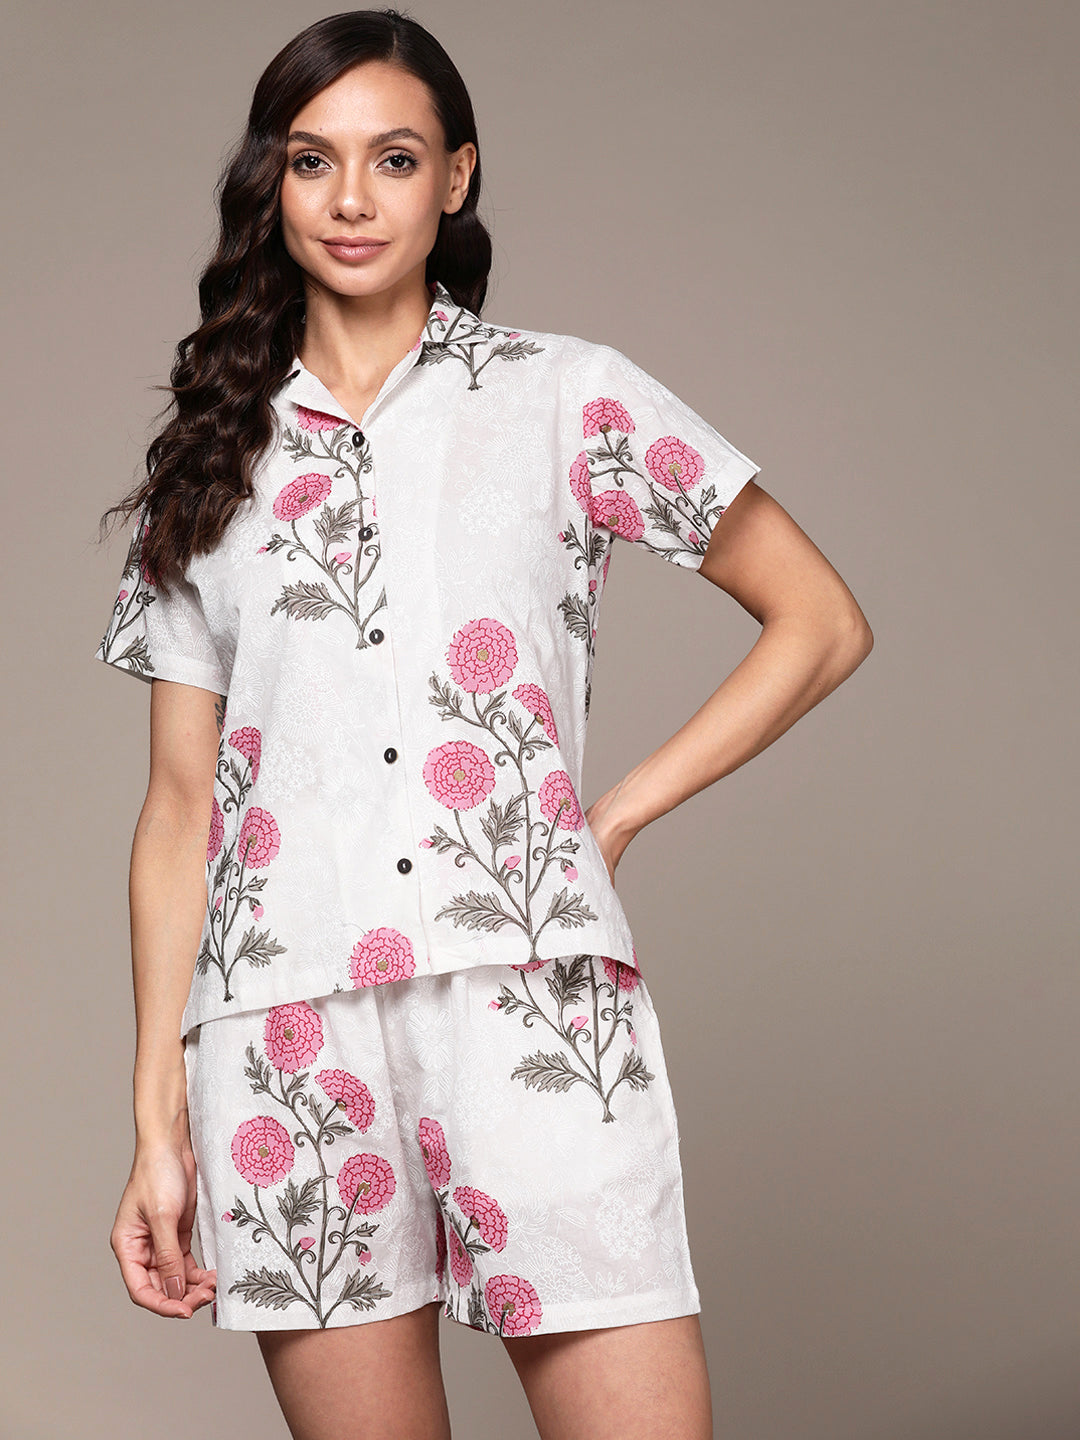 Women's's White Floral Printed Pure Cotton Night Suit